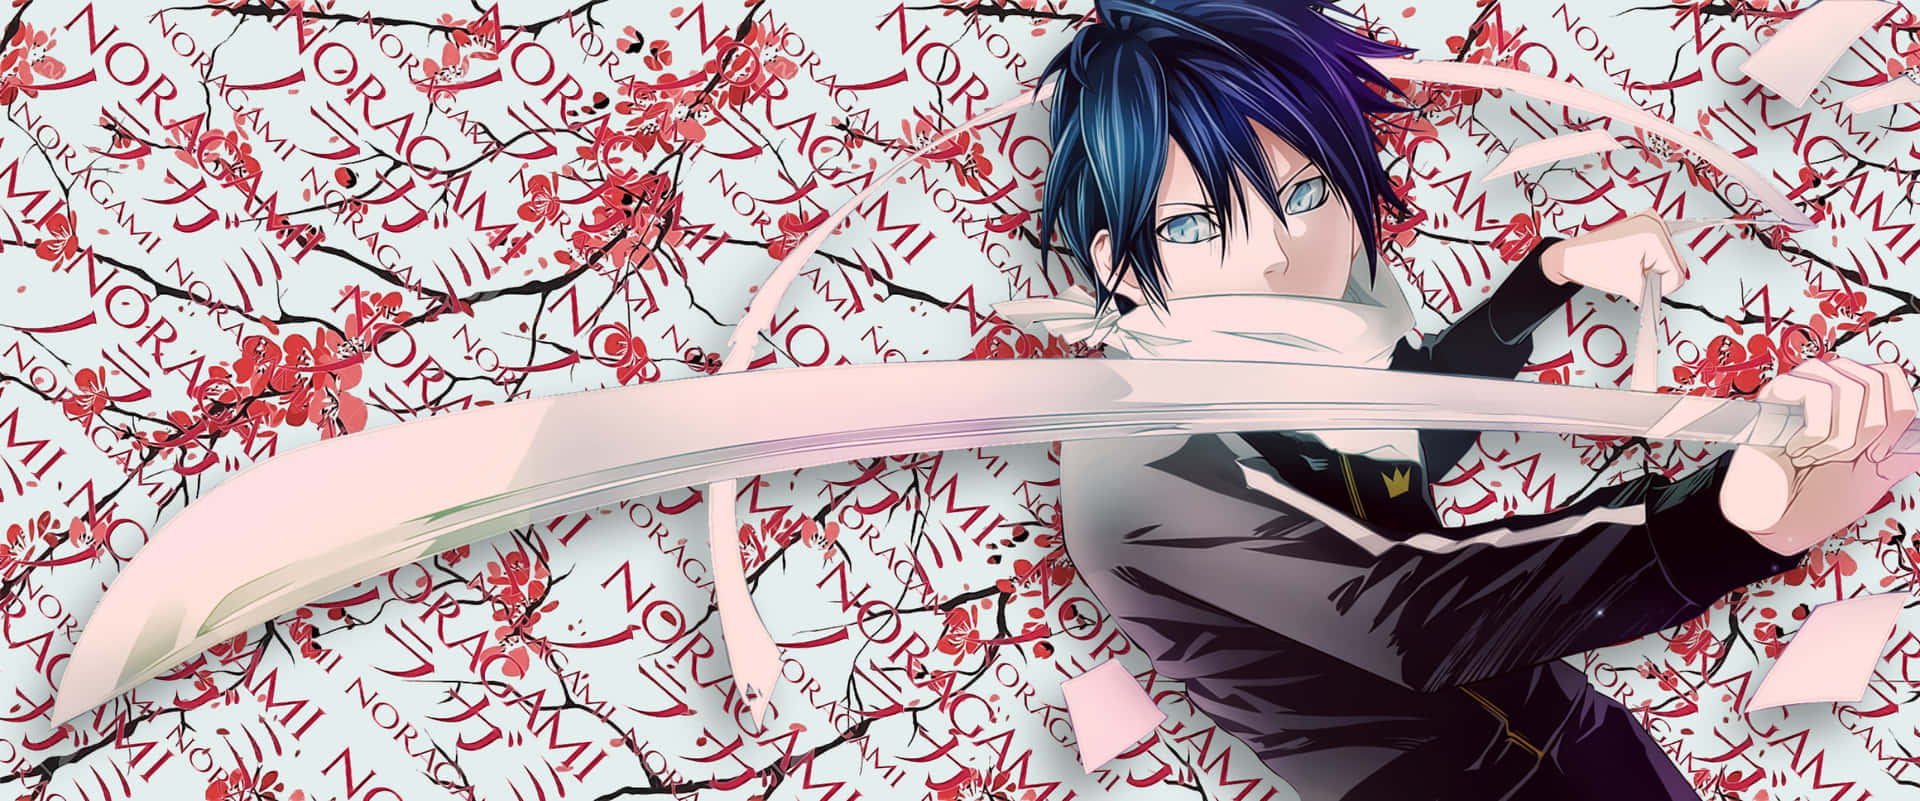 20+ Bishamonten (Noragami) HD Wallpapers and Backgrounds